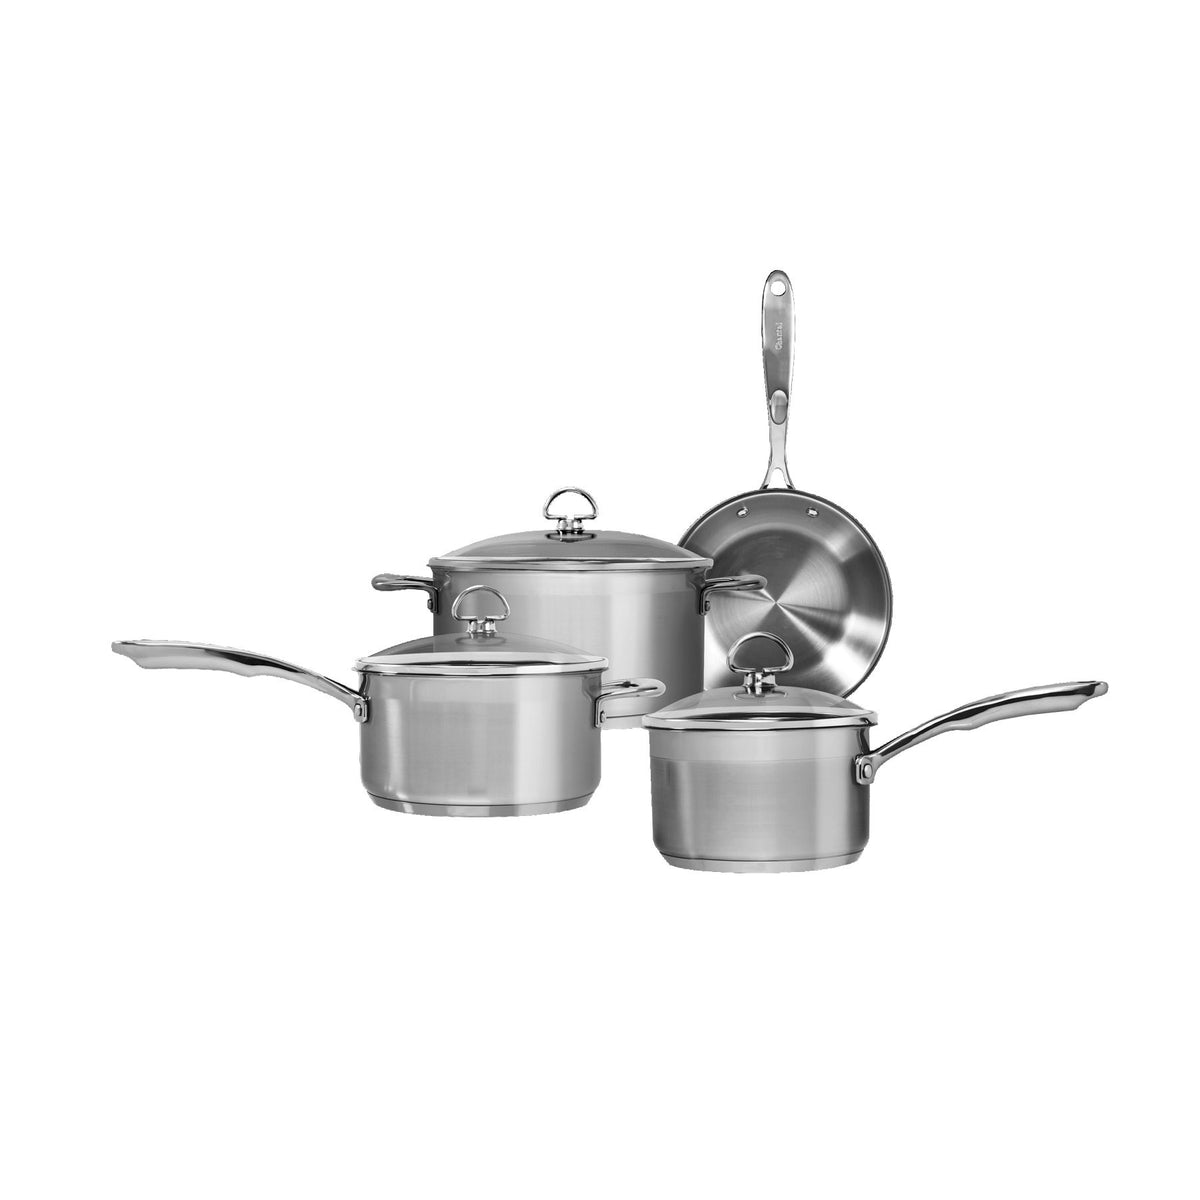 Induction 21 Steel Stockpot with Lid (8 Qt.) – Chantal